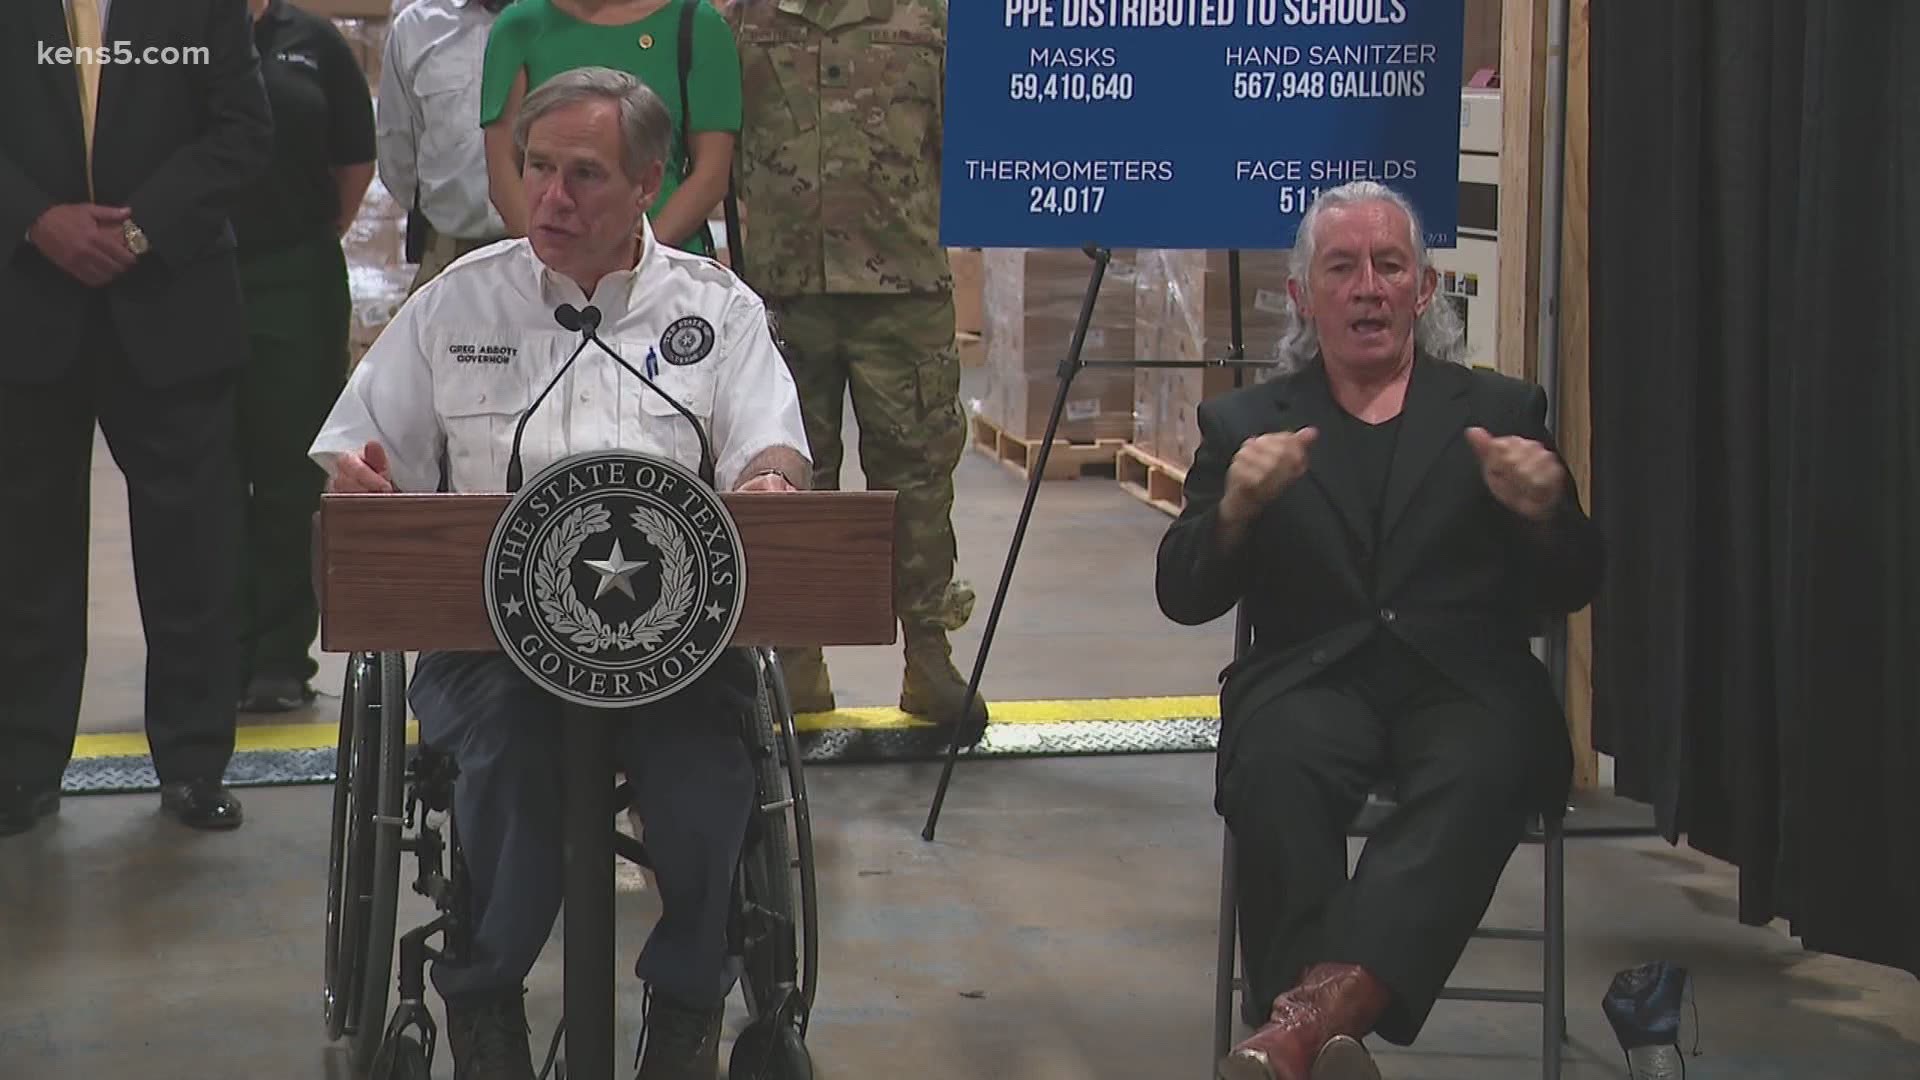 Abbott spoke at the Texas Division of Emergency Management warehouse in San Antonio, adding that National Guard funding will remain in place through year's end.